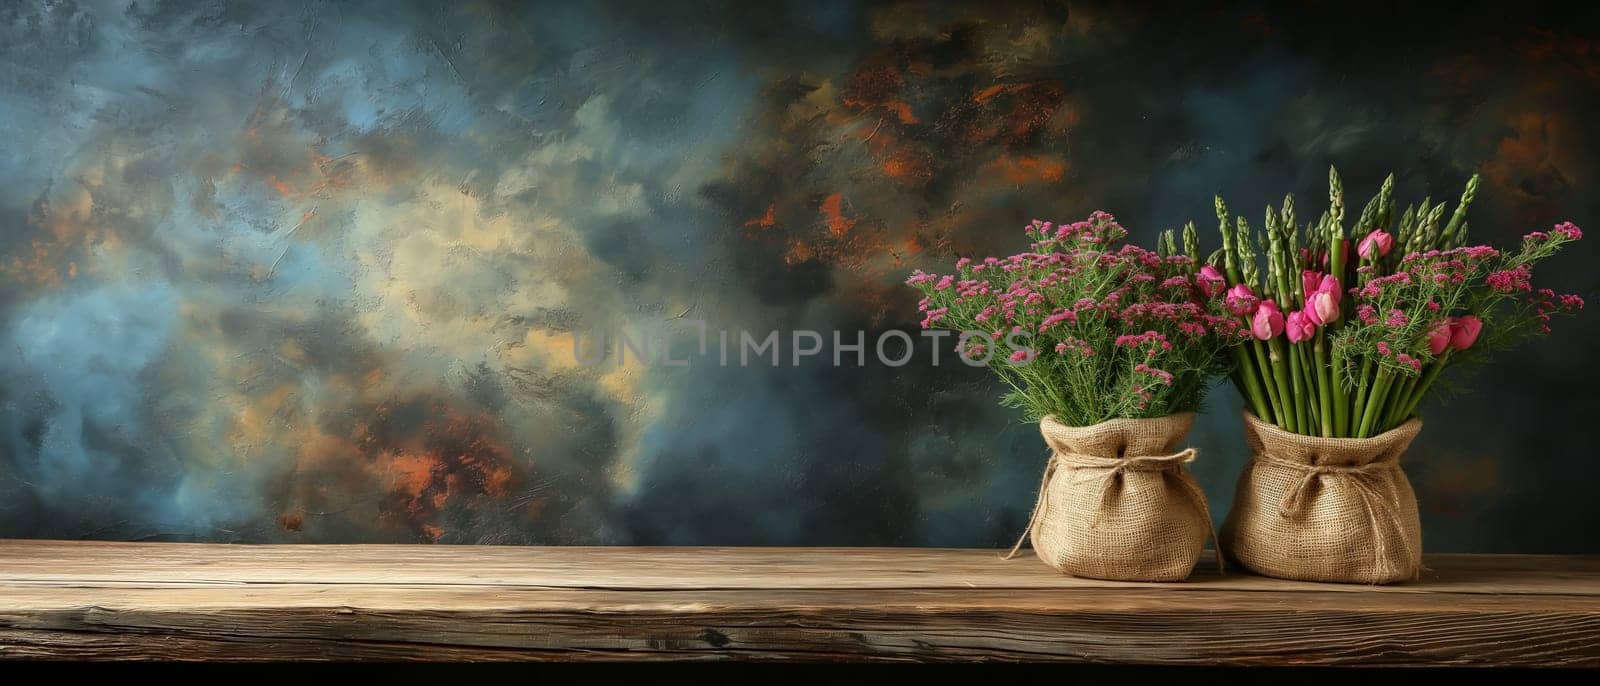 Floral Elegance on Rustic Table by Fischeron